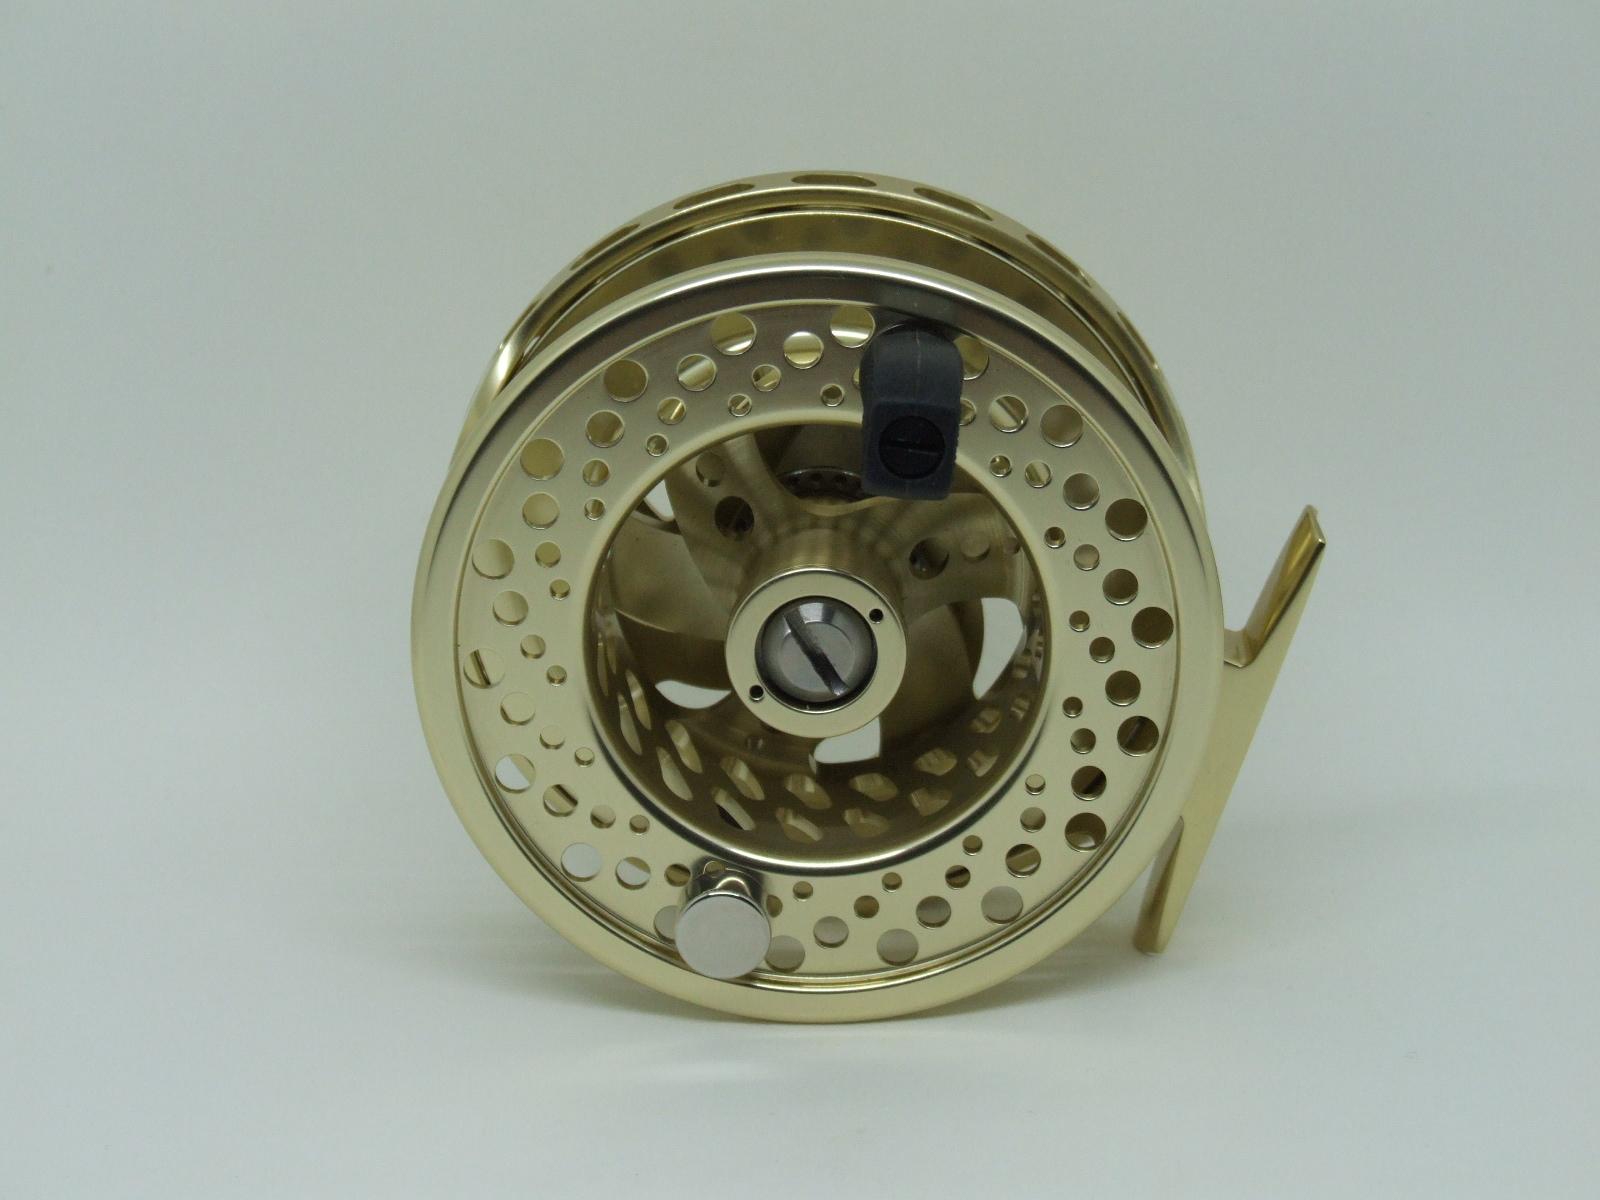 Orvis lll Vortex Vo2 fly reel used